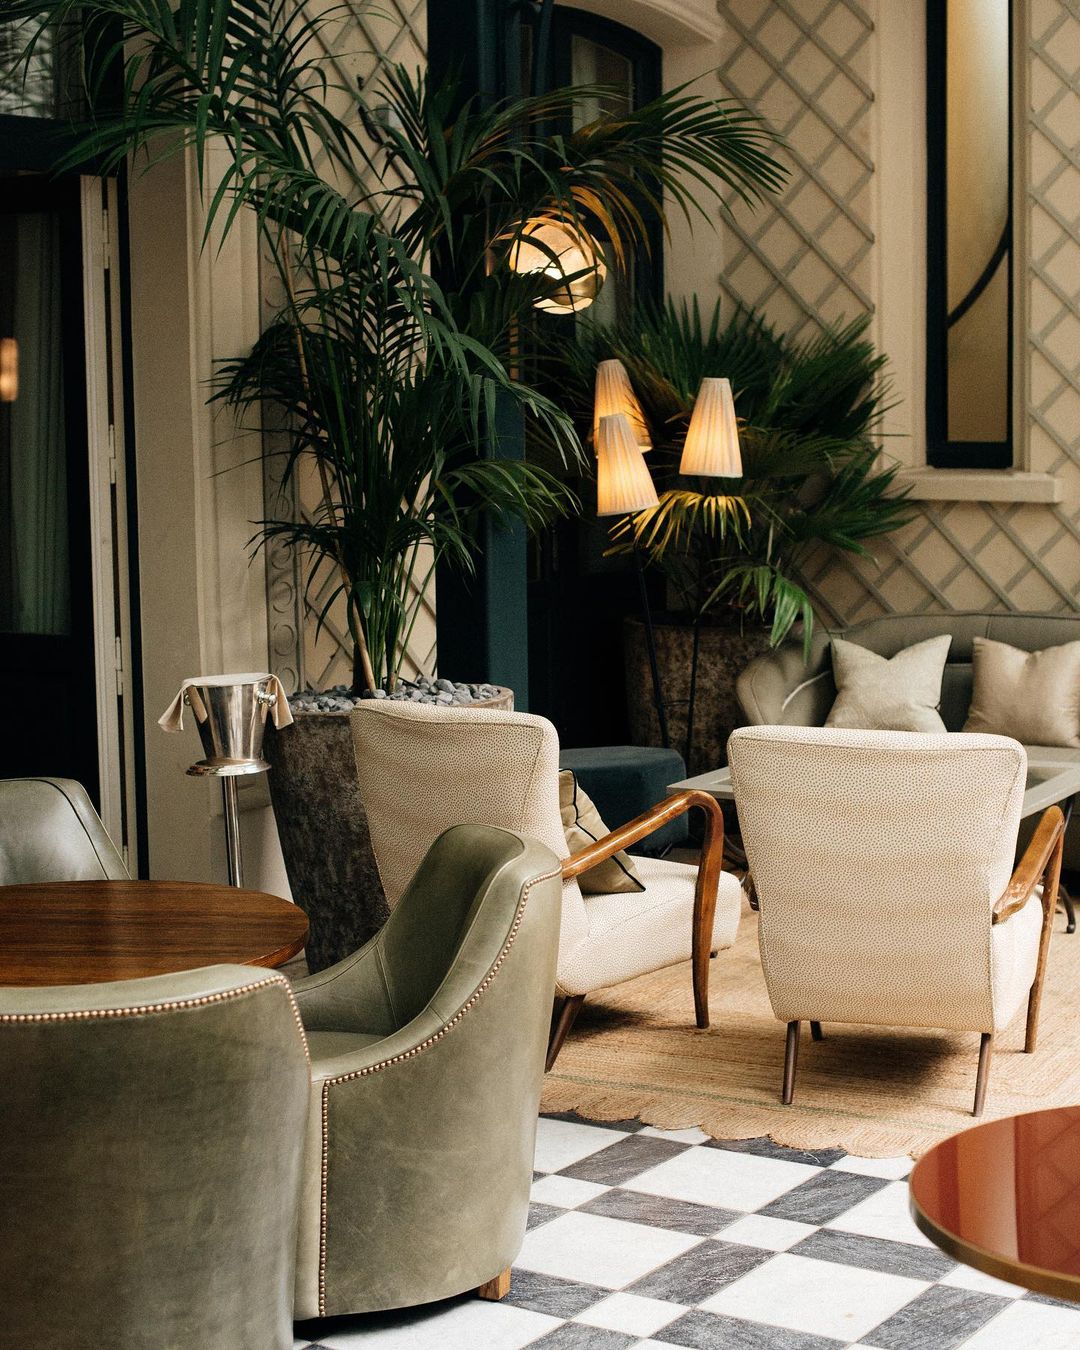 A sage and cream colored lounge space at Soho House Paris with brushed leather chairs, black and white checkered floors, scalloped jute rugs, latticework walls and floor-to-ceiling plants